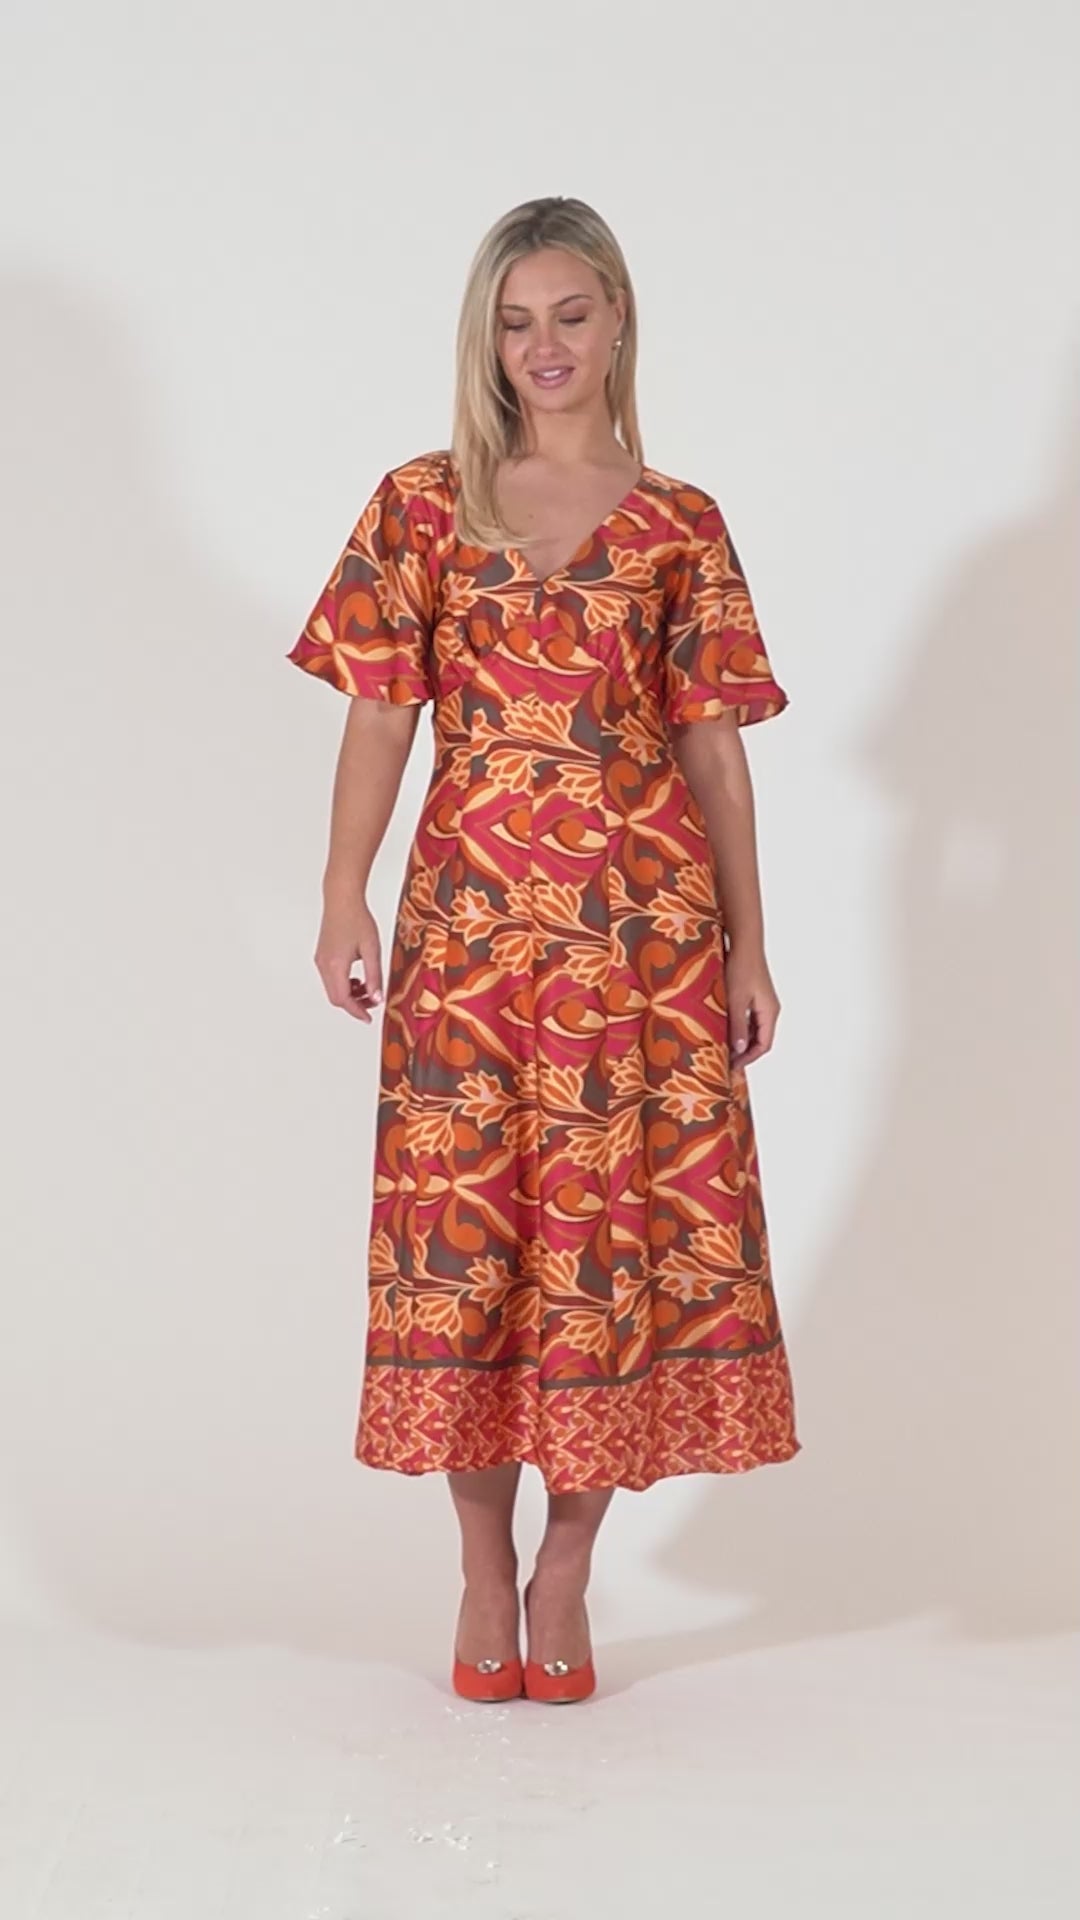 Caprice V-neck Dress with Empire Waist and Loose Half Sleeves - Orange & Red